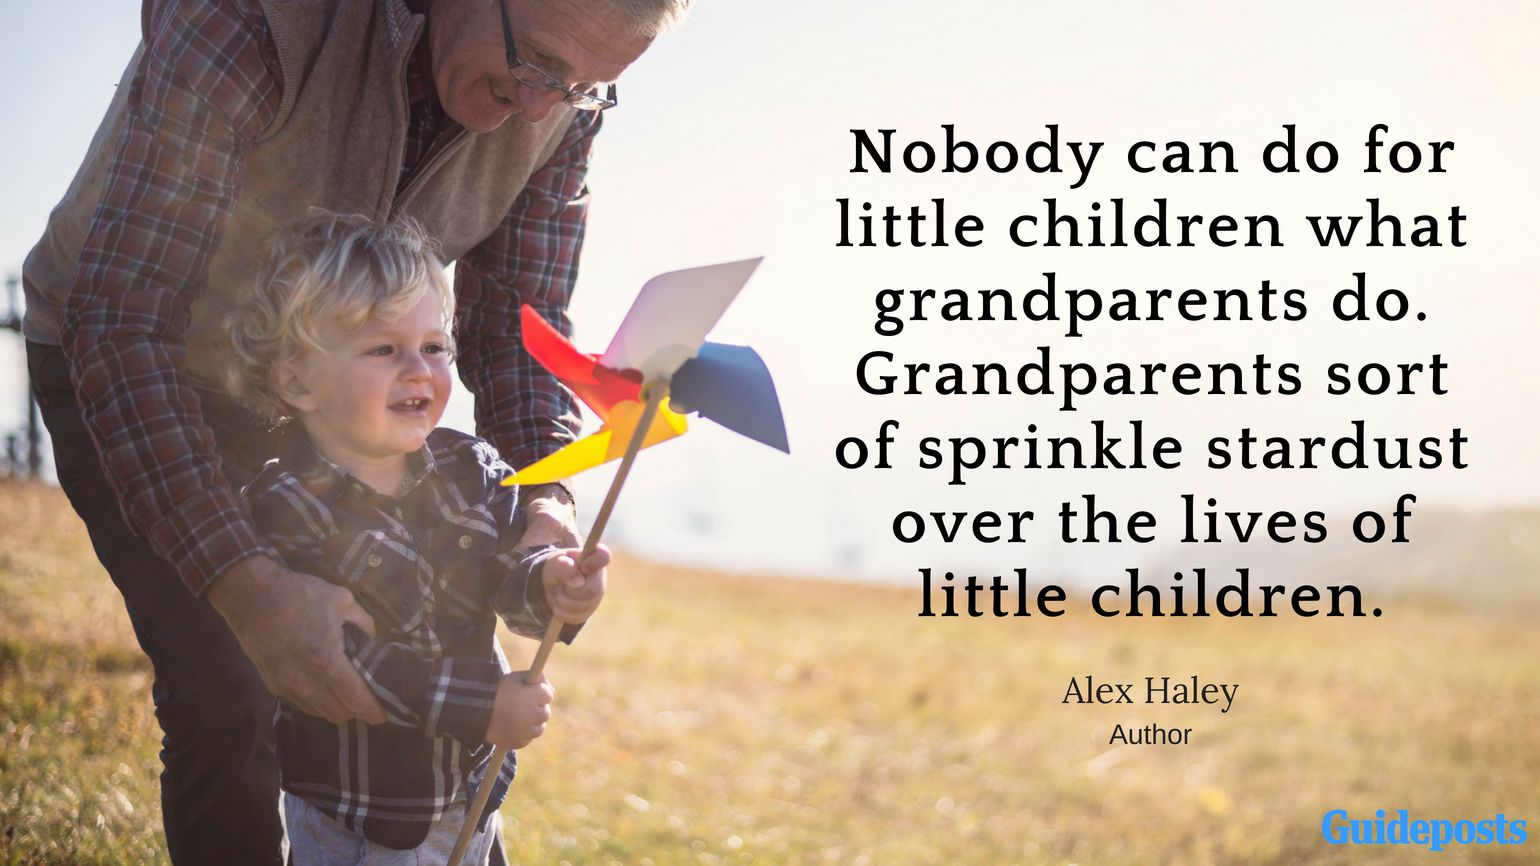 Nobody can do for little children what grandparents do. Grandparents sort of sprinkle stardust over the lives of little children. —Alex Haley, author